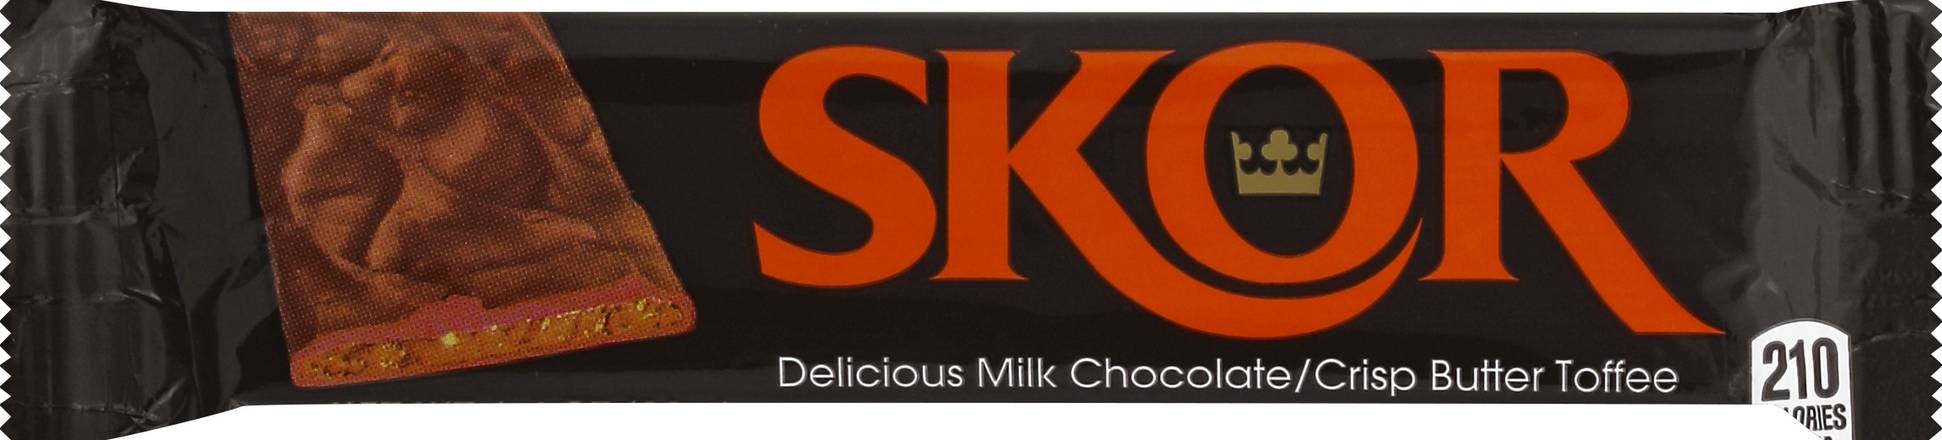 Skor Milk Chocolate and Butter Toffee Candy